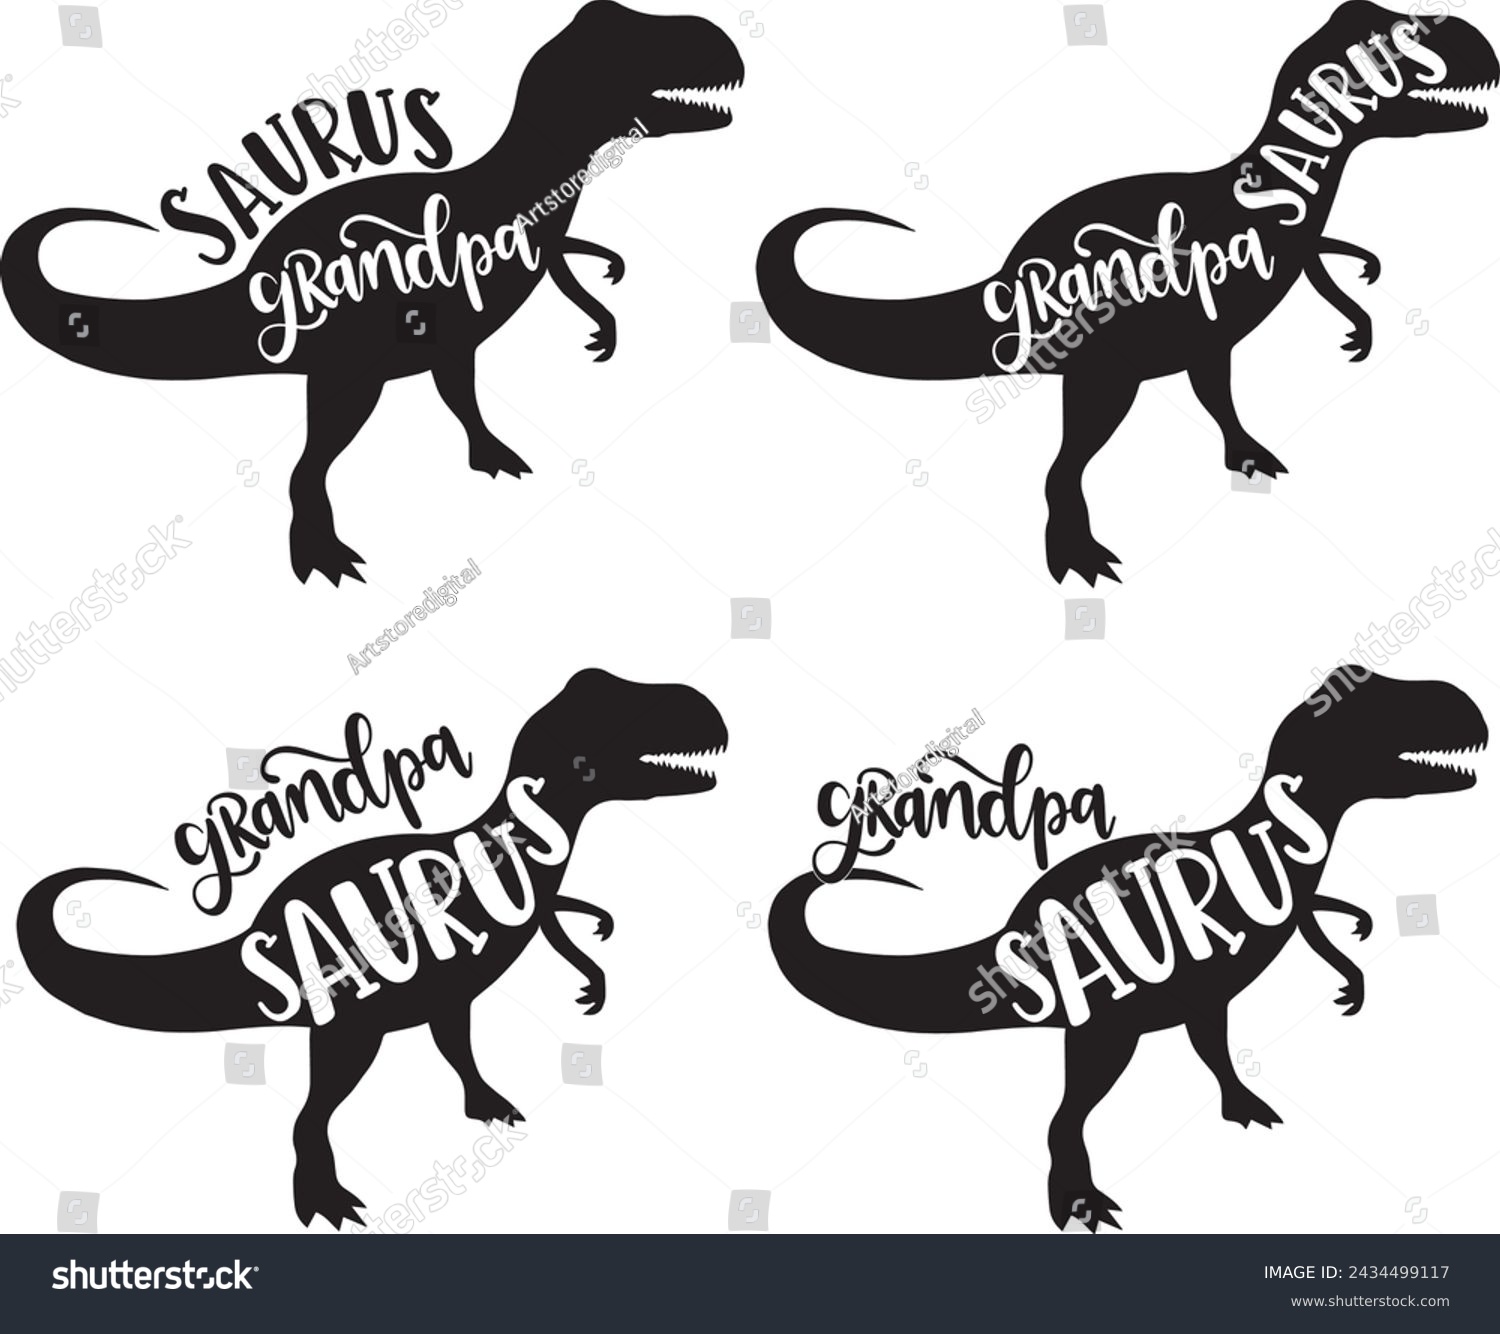 SVG of 4 styles grandpa saurus, family saurus this design is good for printing, scrap booking, gift, mugs, t-shirt and more svg